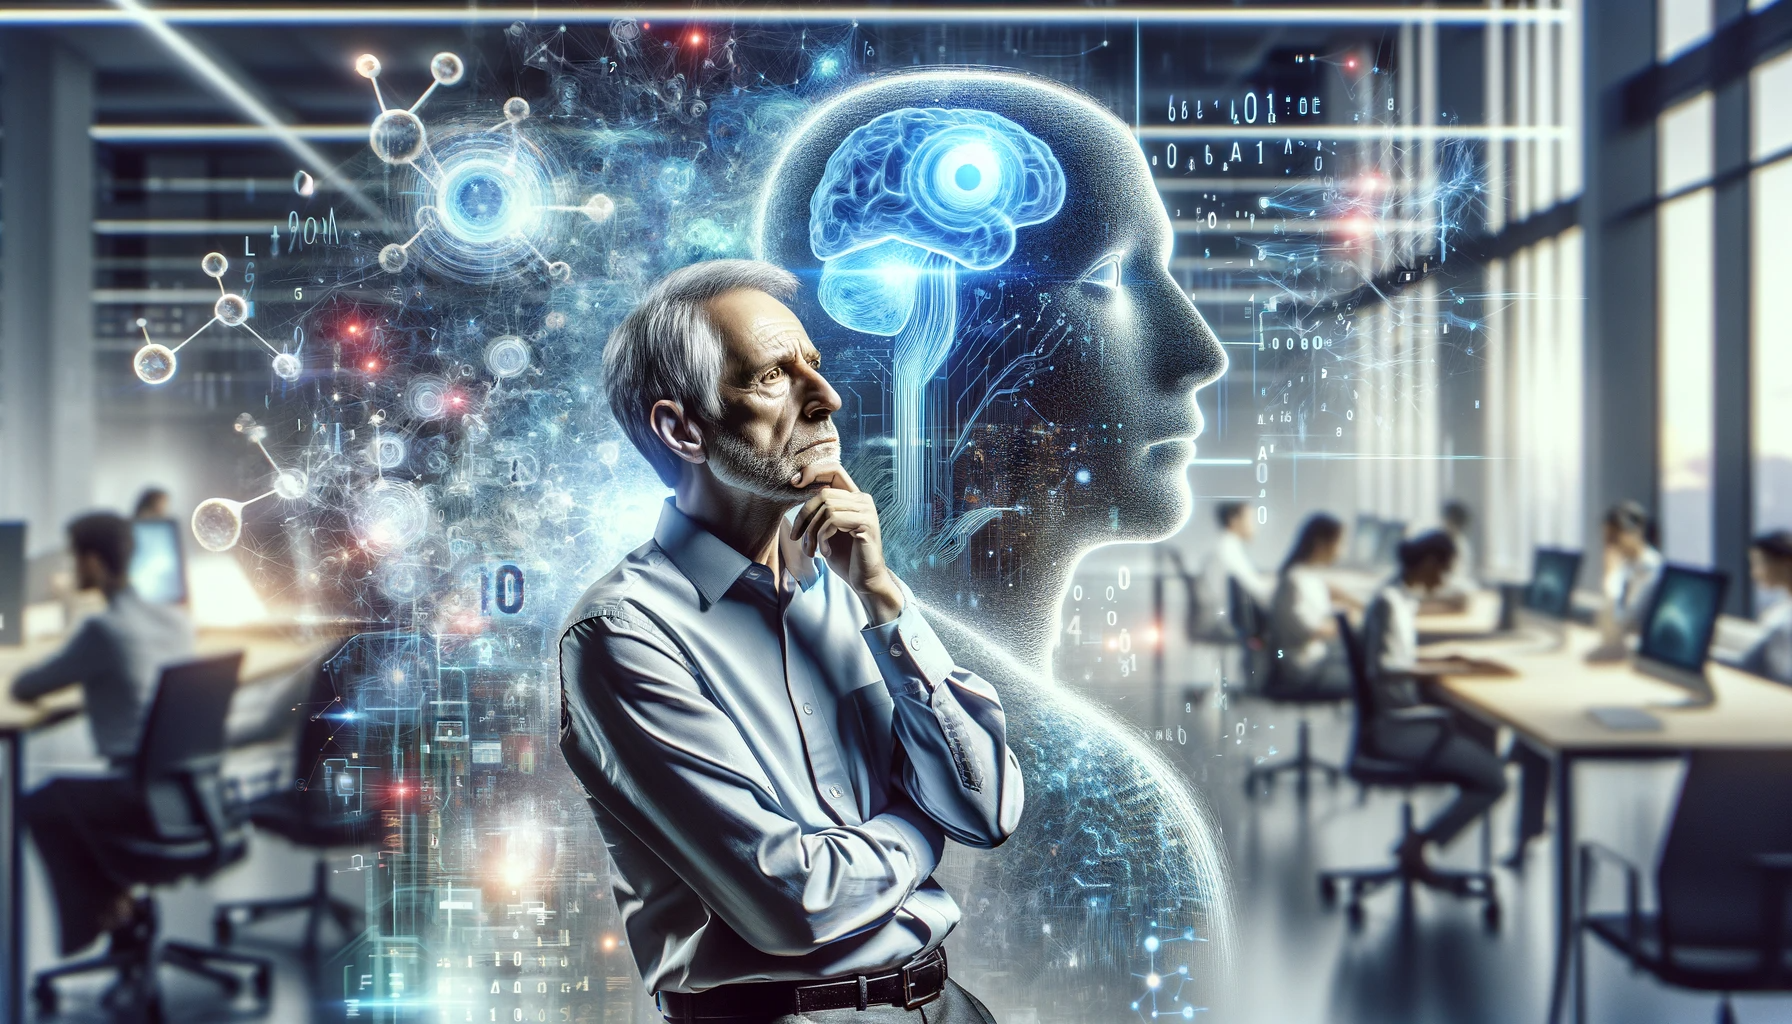 DALL·E 2023-11-30 00.09.48 - A conceptual image of Geoffrey Hinton, the father of AI, expressing concern over his creation. The image shows a thoughtful Hinton in a modern office .png